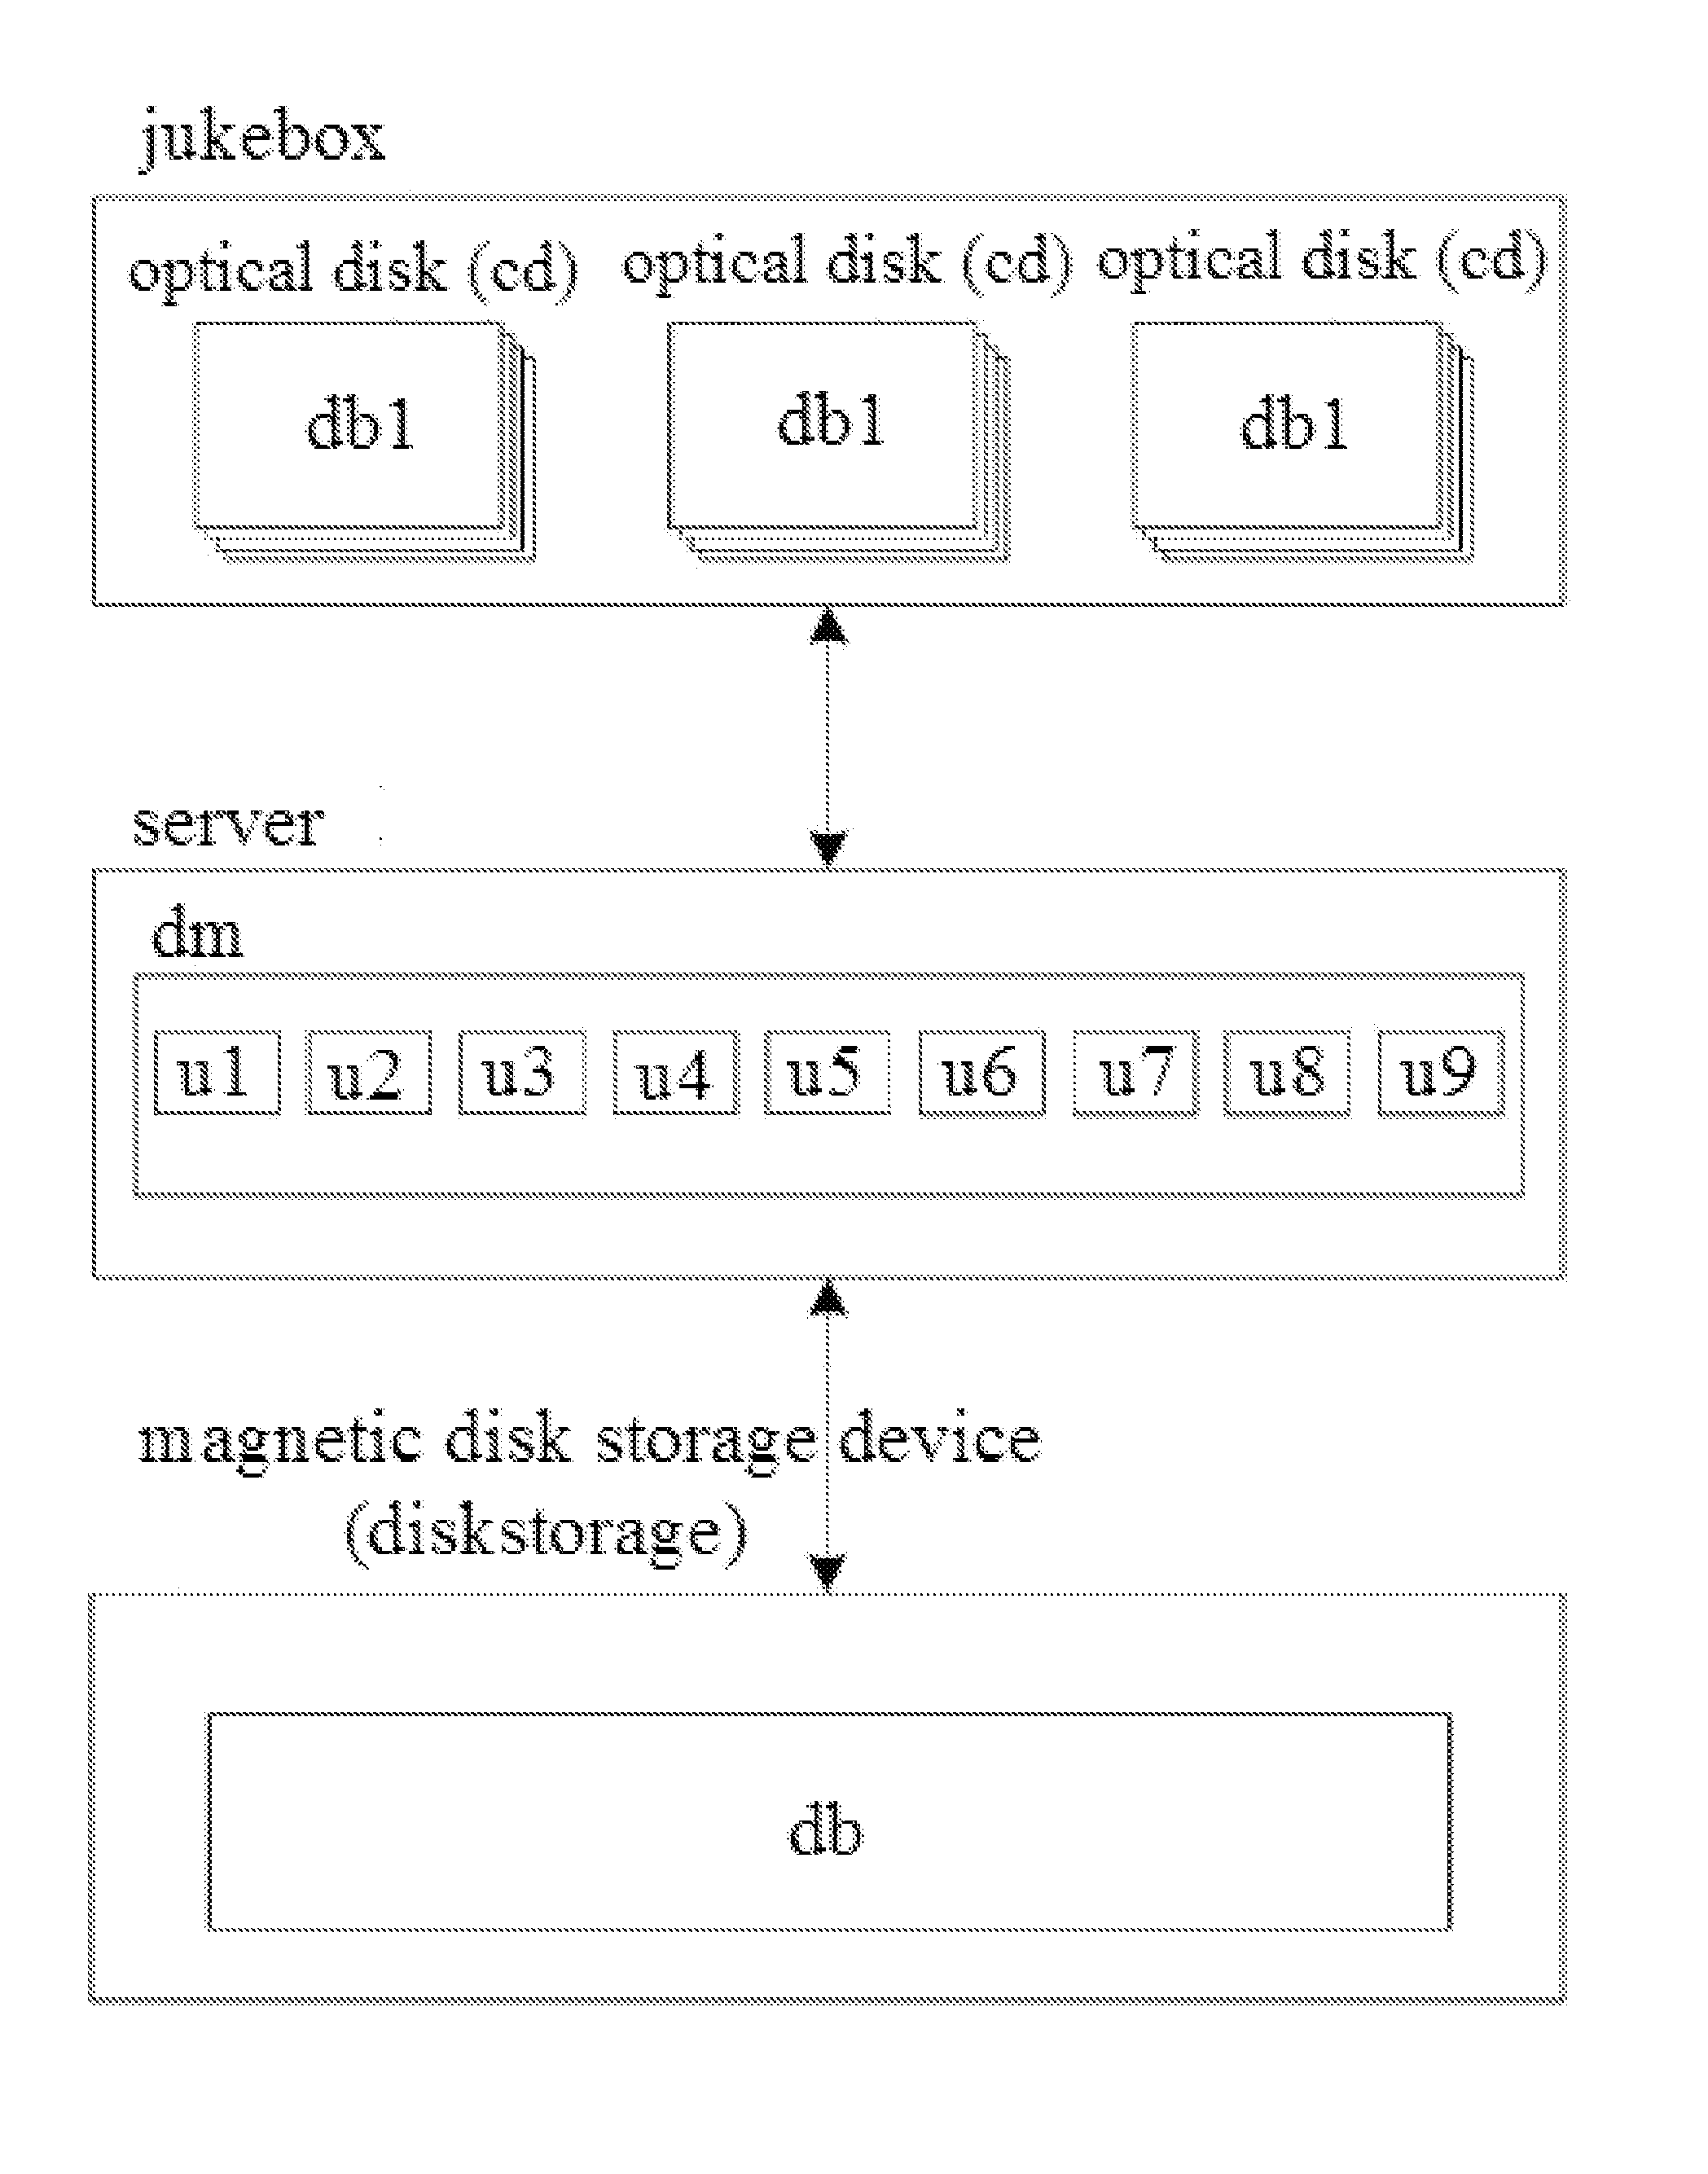 Database Storage System based on Optical Disk and Method Using the System